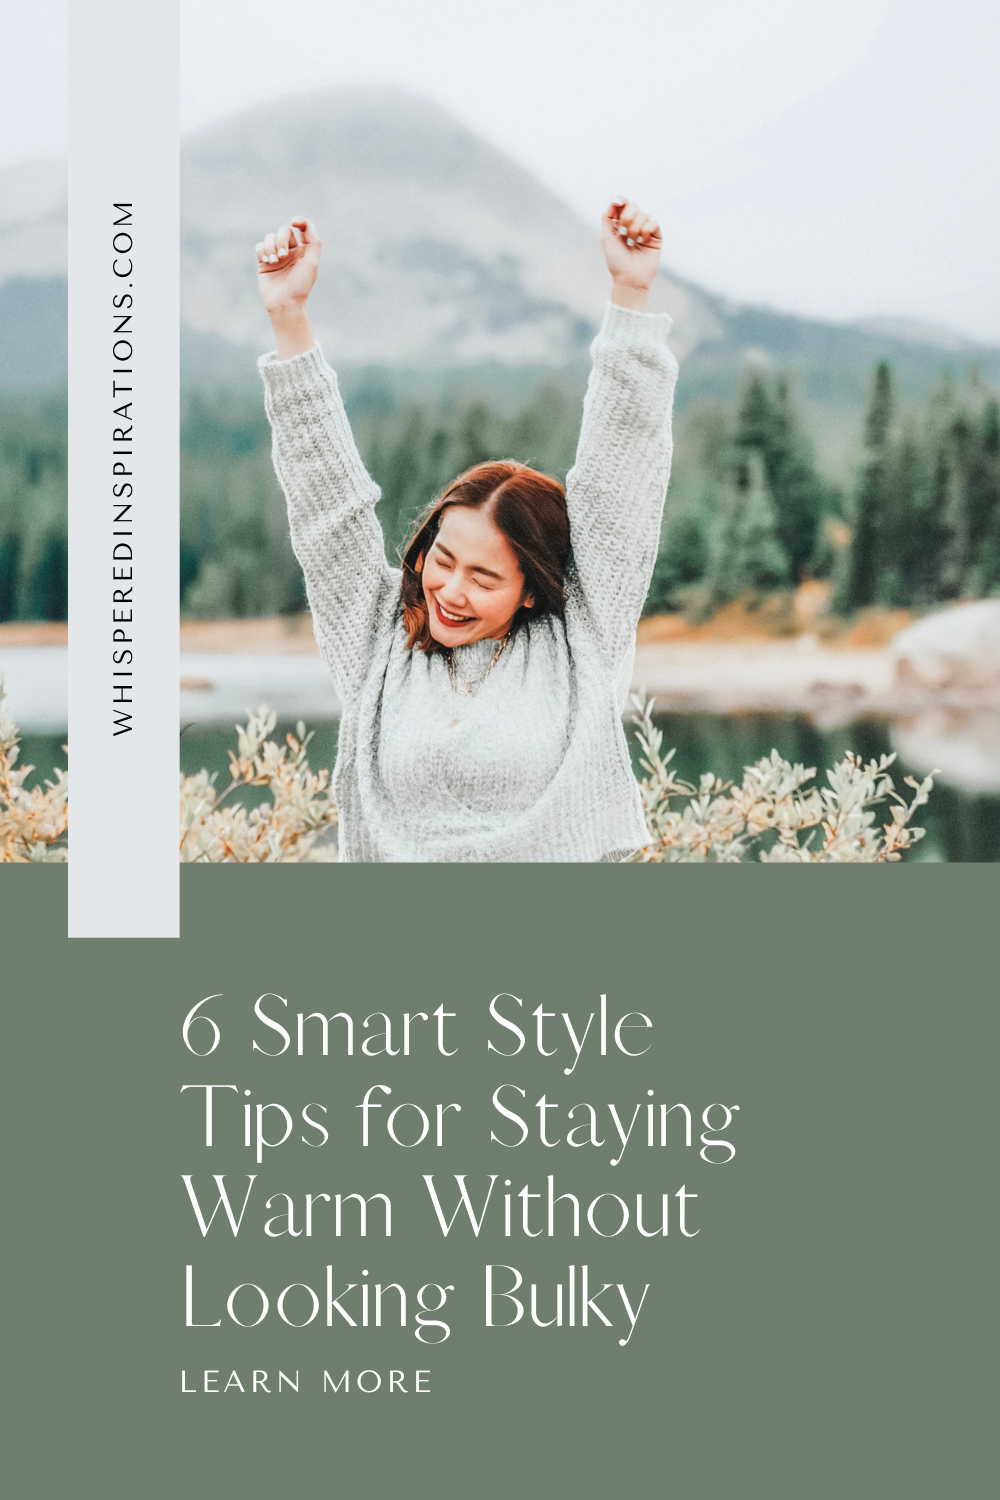 A woman throws her hands in the air, closes her eyes, and smiles. She is outside by a lake surrounded by nature. This article covers style tips for staying warm without looking bulky.